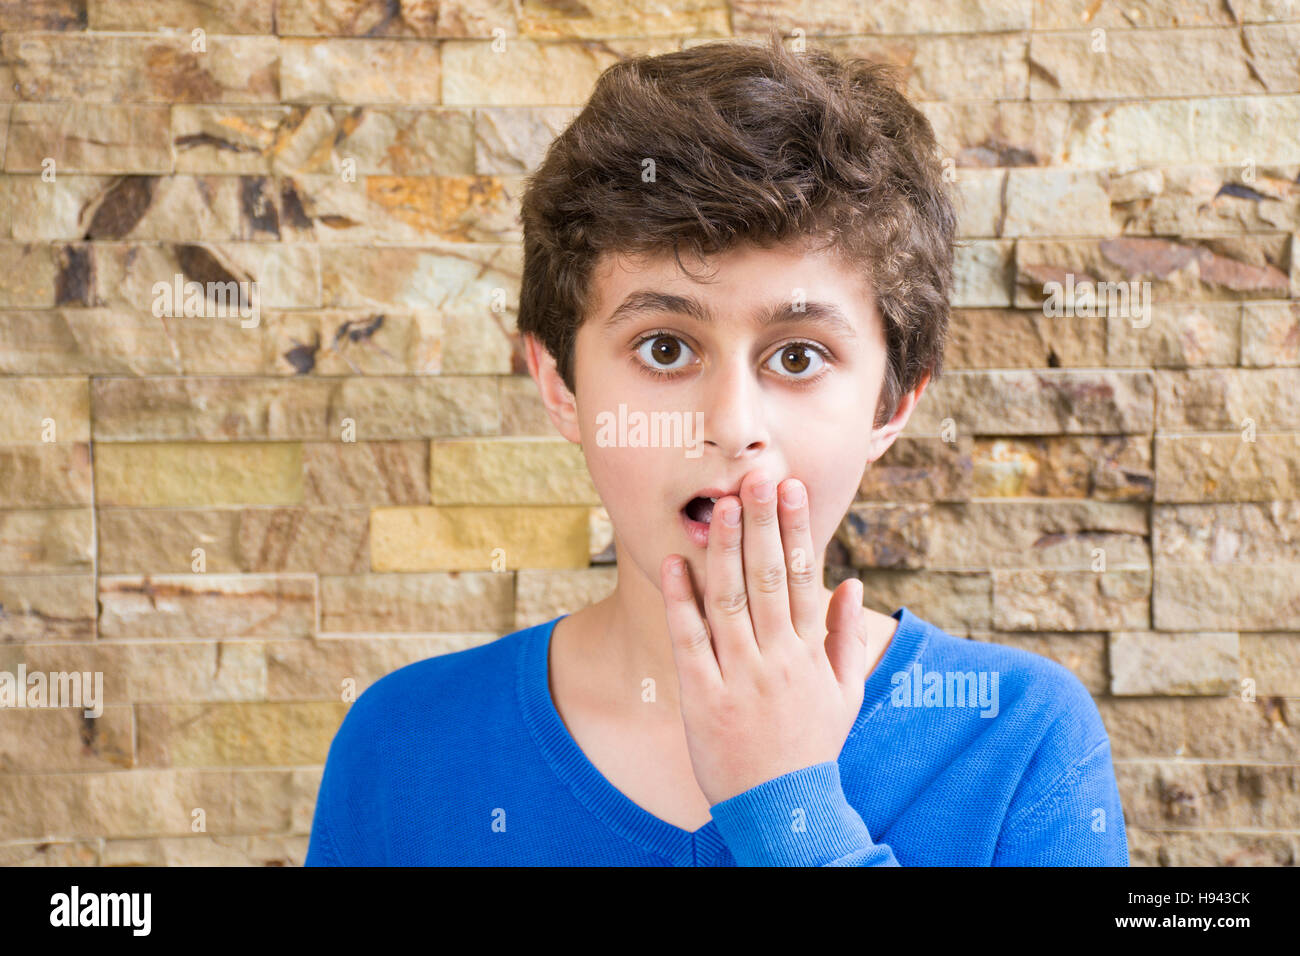 Shocked 10 years old boy covering mouth with hand Stock Photo